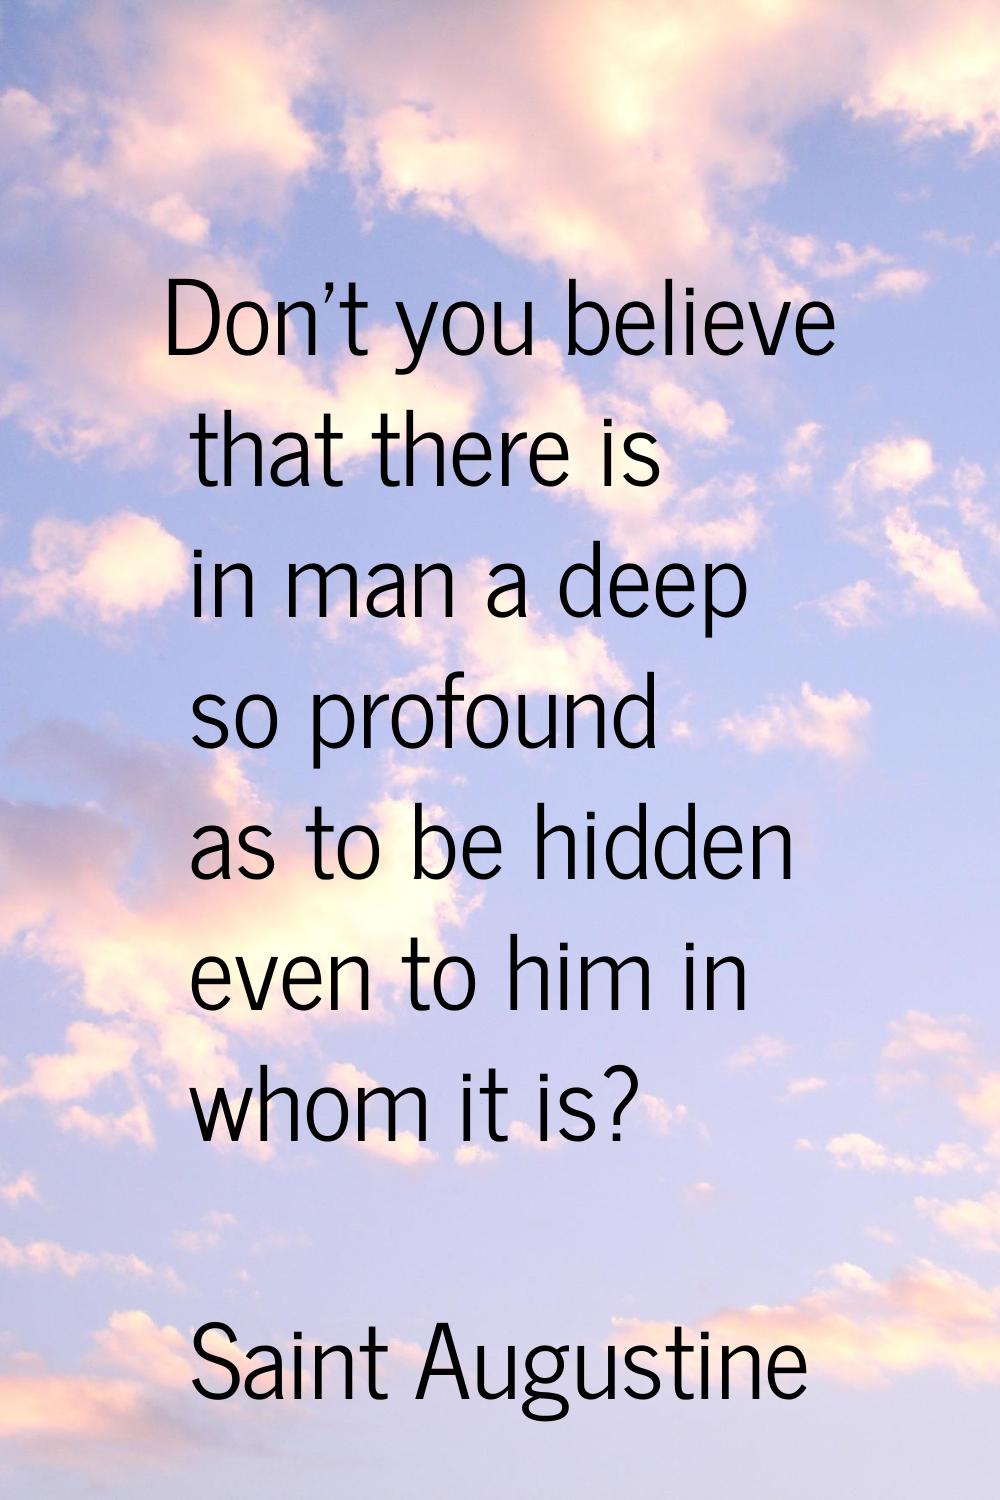 Don't you believe that there is in man a deep so profound as to be hidden even to him in whom it is